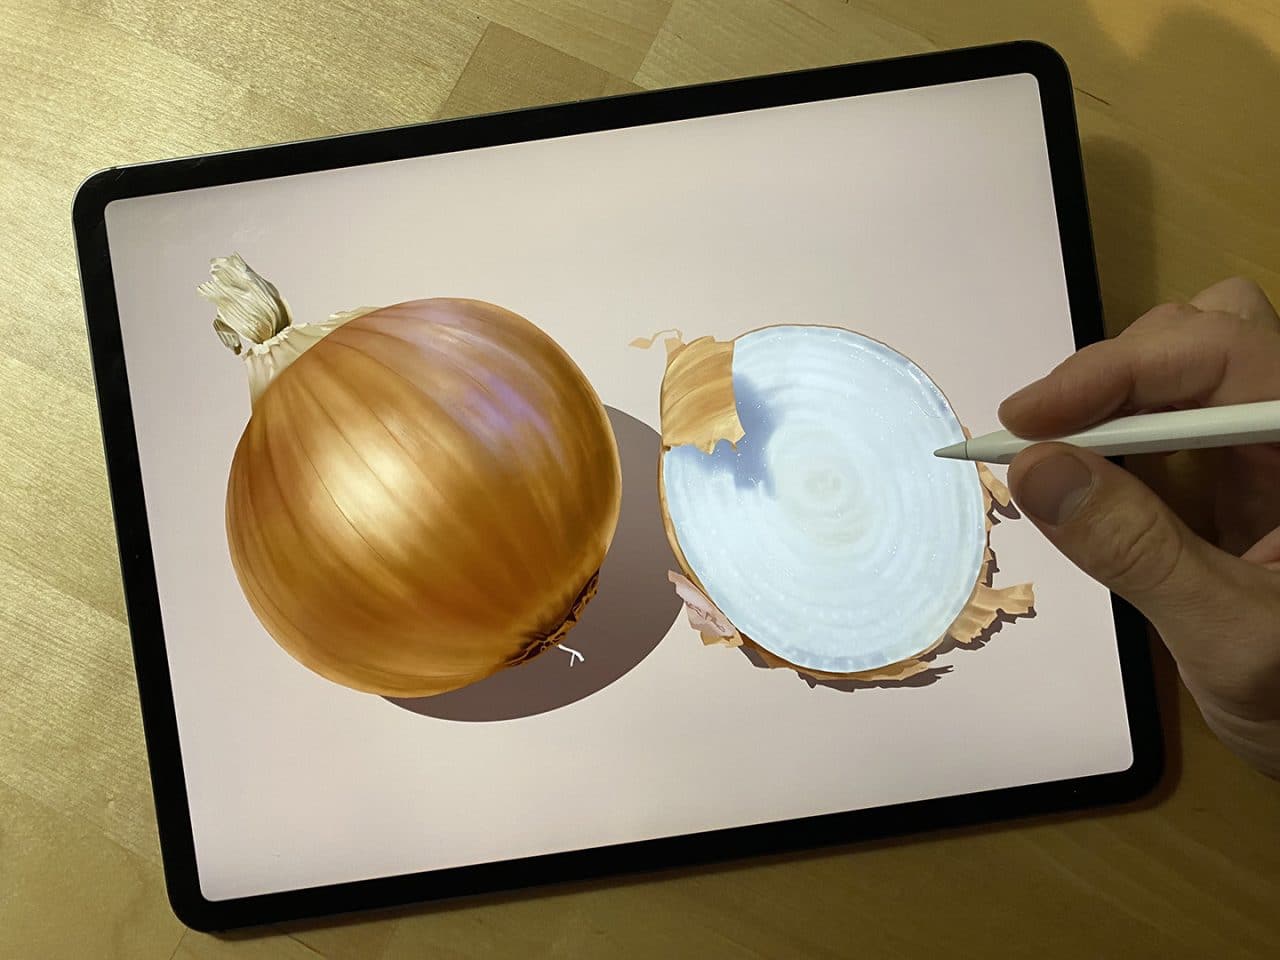 Learn the process of creating a digital onion drawing with Procreate on iPad Pro.